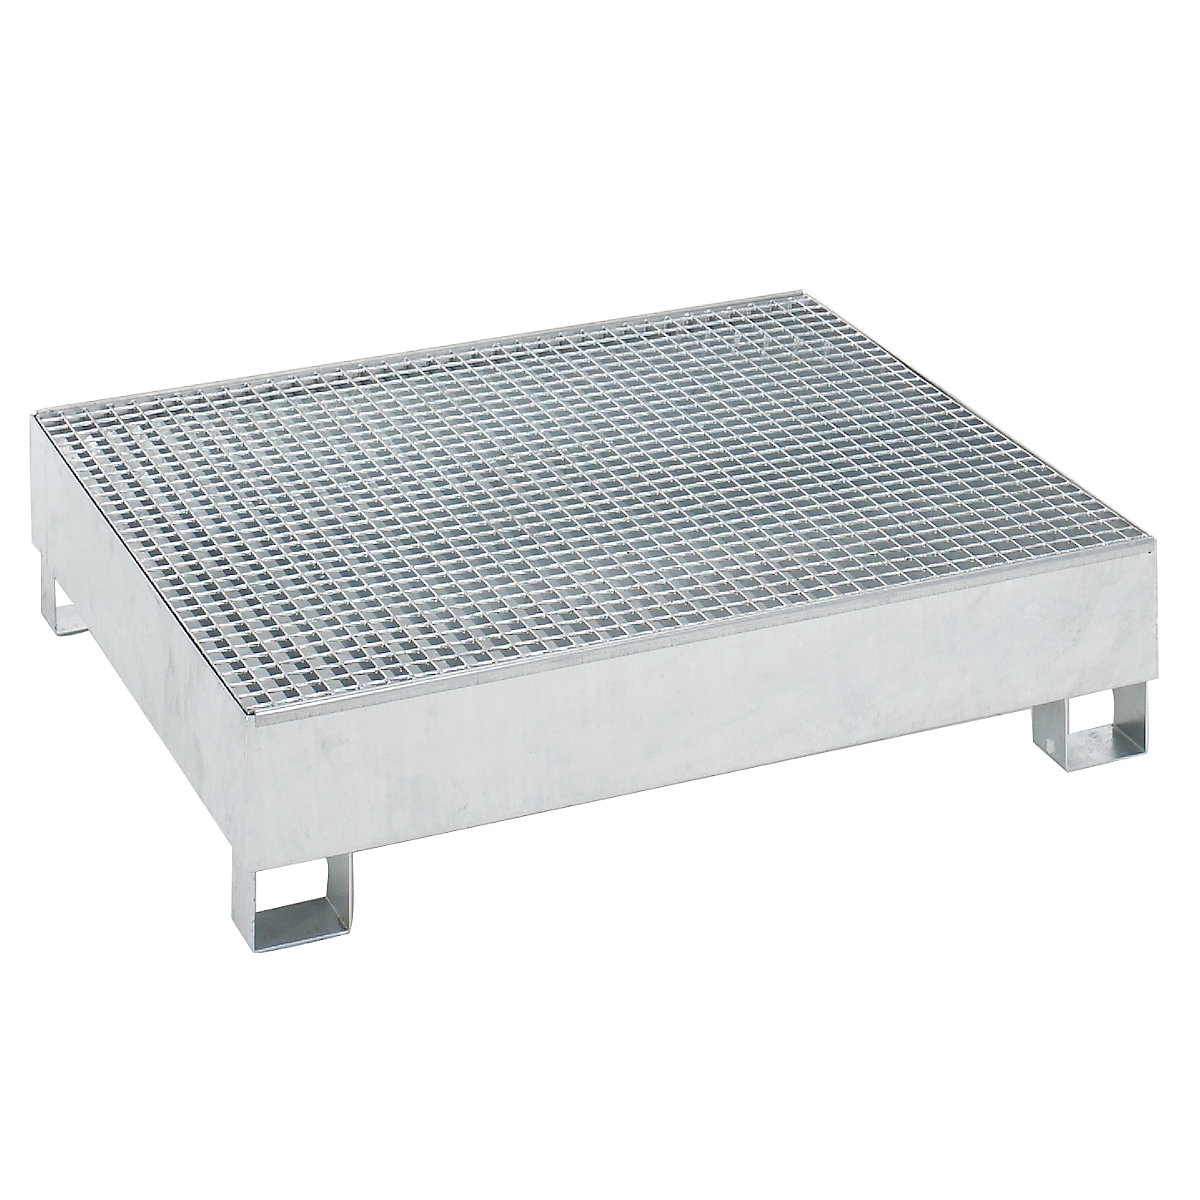 Steel sump tray for 200 l drums – eurokraft basic, LxWxH 1200 x 1200 x 285 mm, with certification, hot dip galvanised, with grate-4